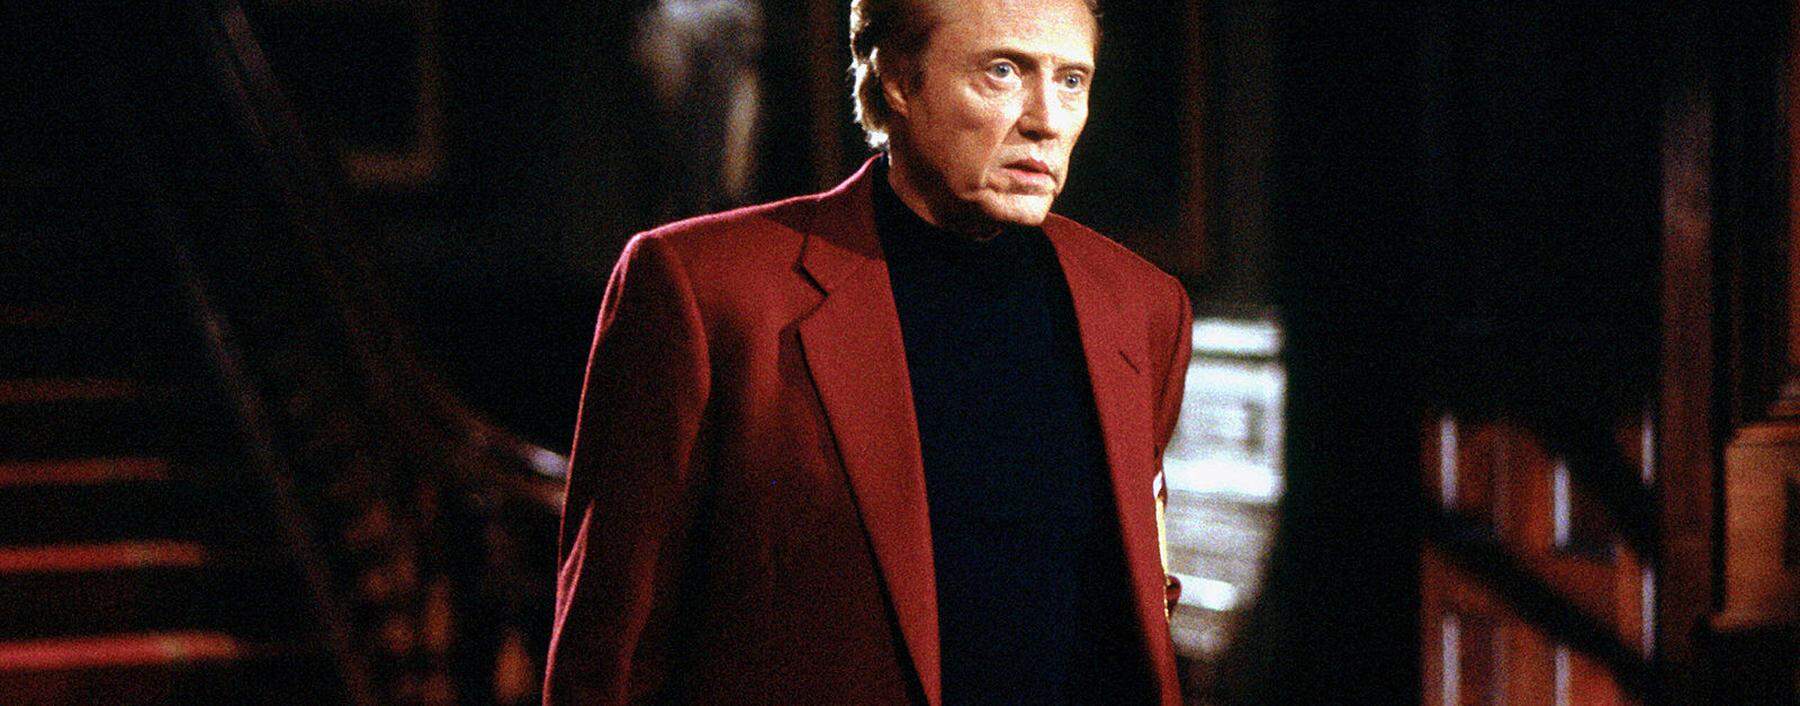 THE STEPFORD WIVES, Christopher Walken, 2004, (c) Paramount/courtesy Everett Collection Paramount/Courtesy Everett Colle